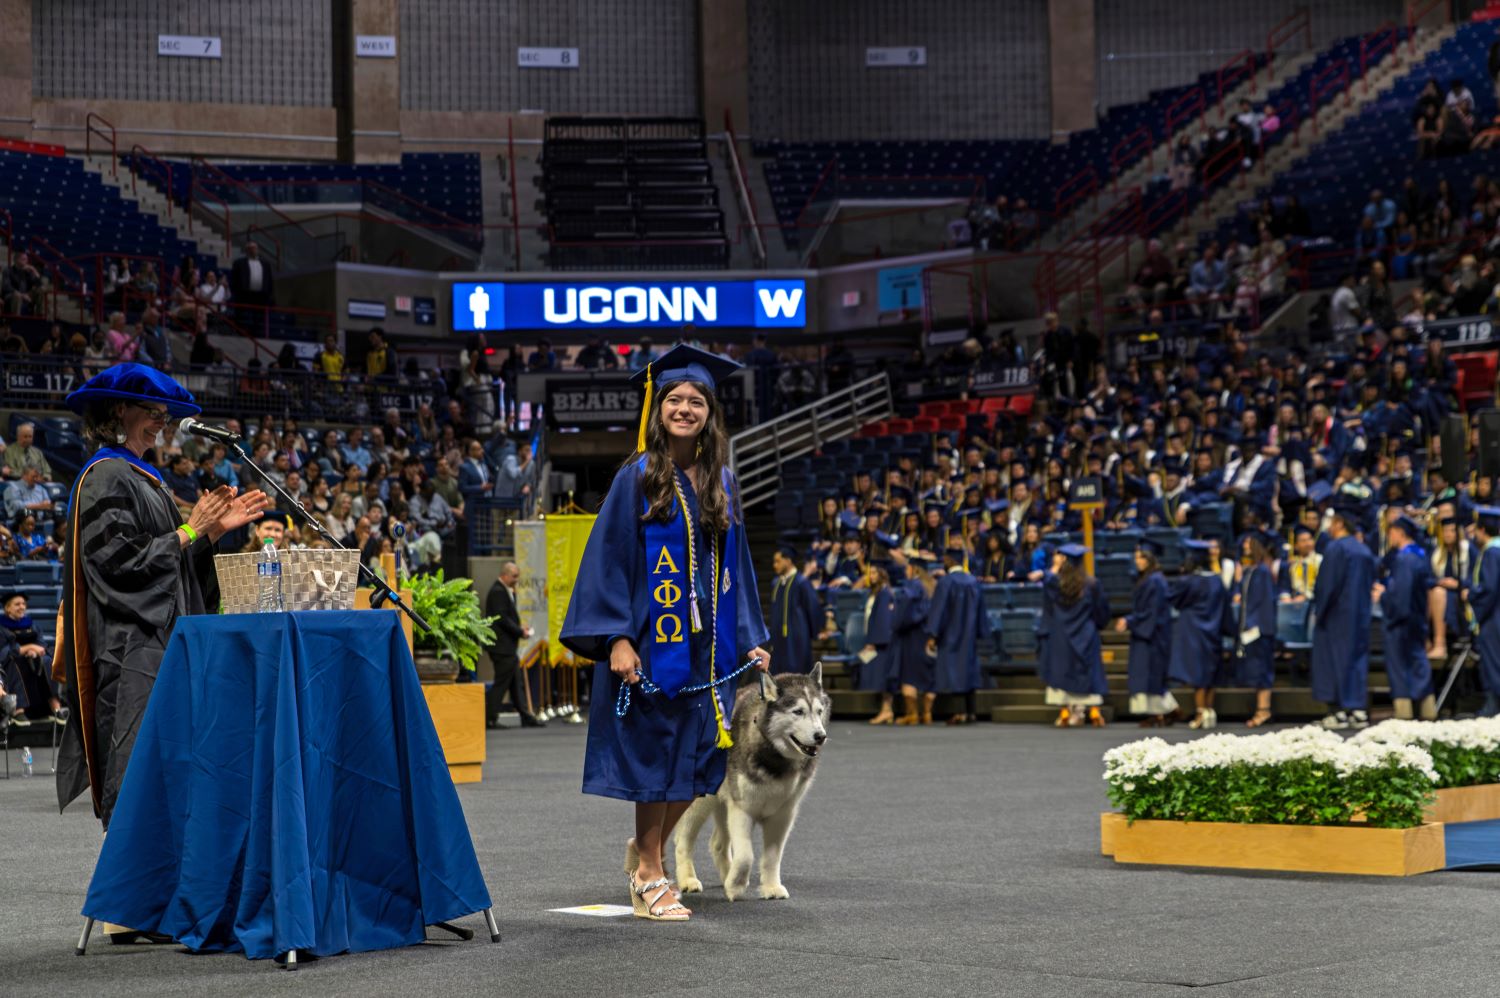 Sophie Finkelstein '24, a student handler for the Jonathans, receives her degree with Jonathan XIV. (Nick Snow/UConn Photo)